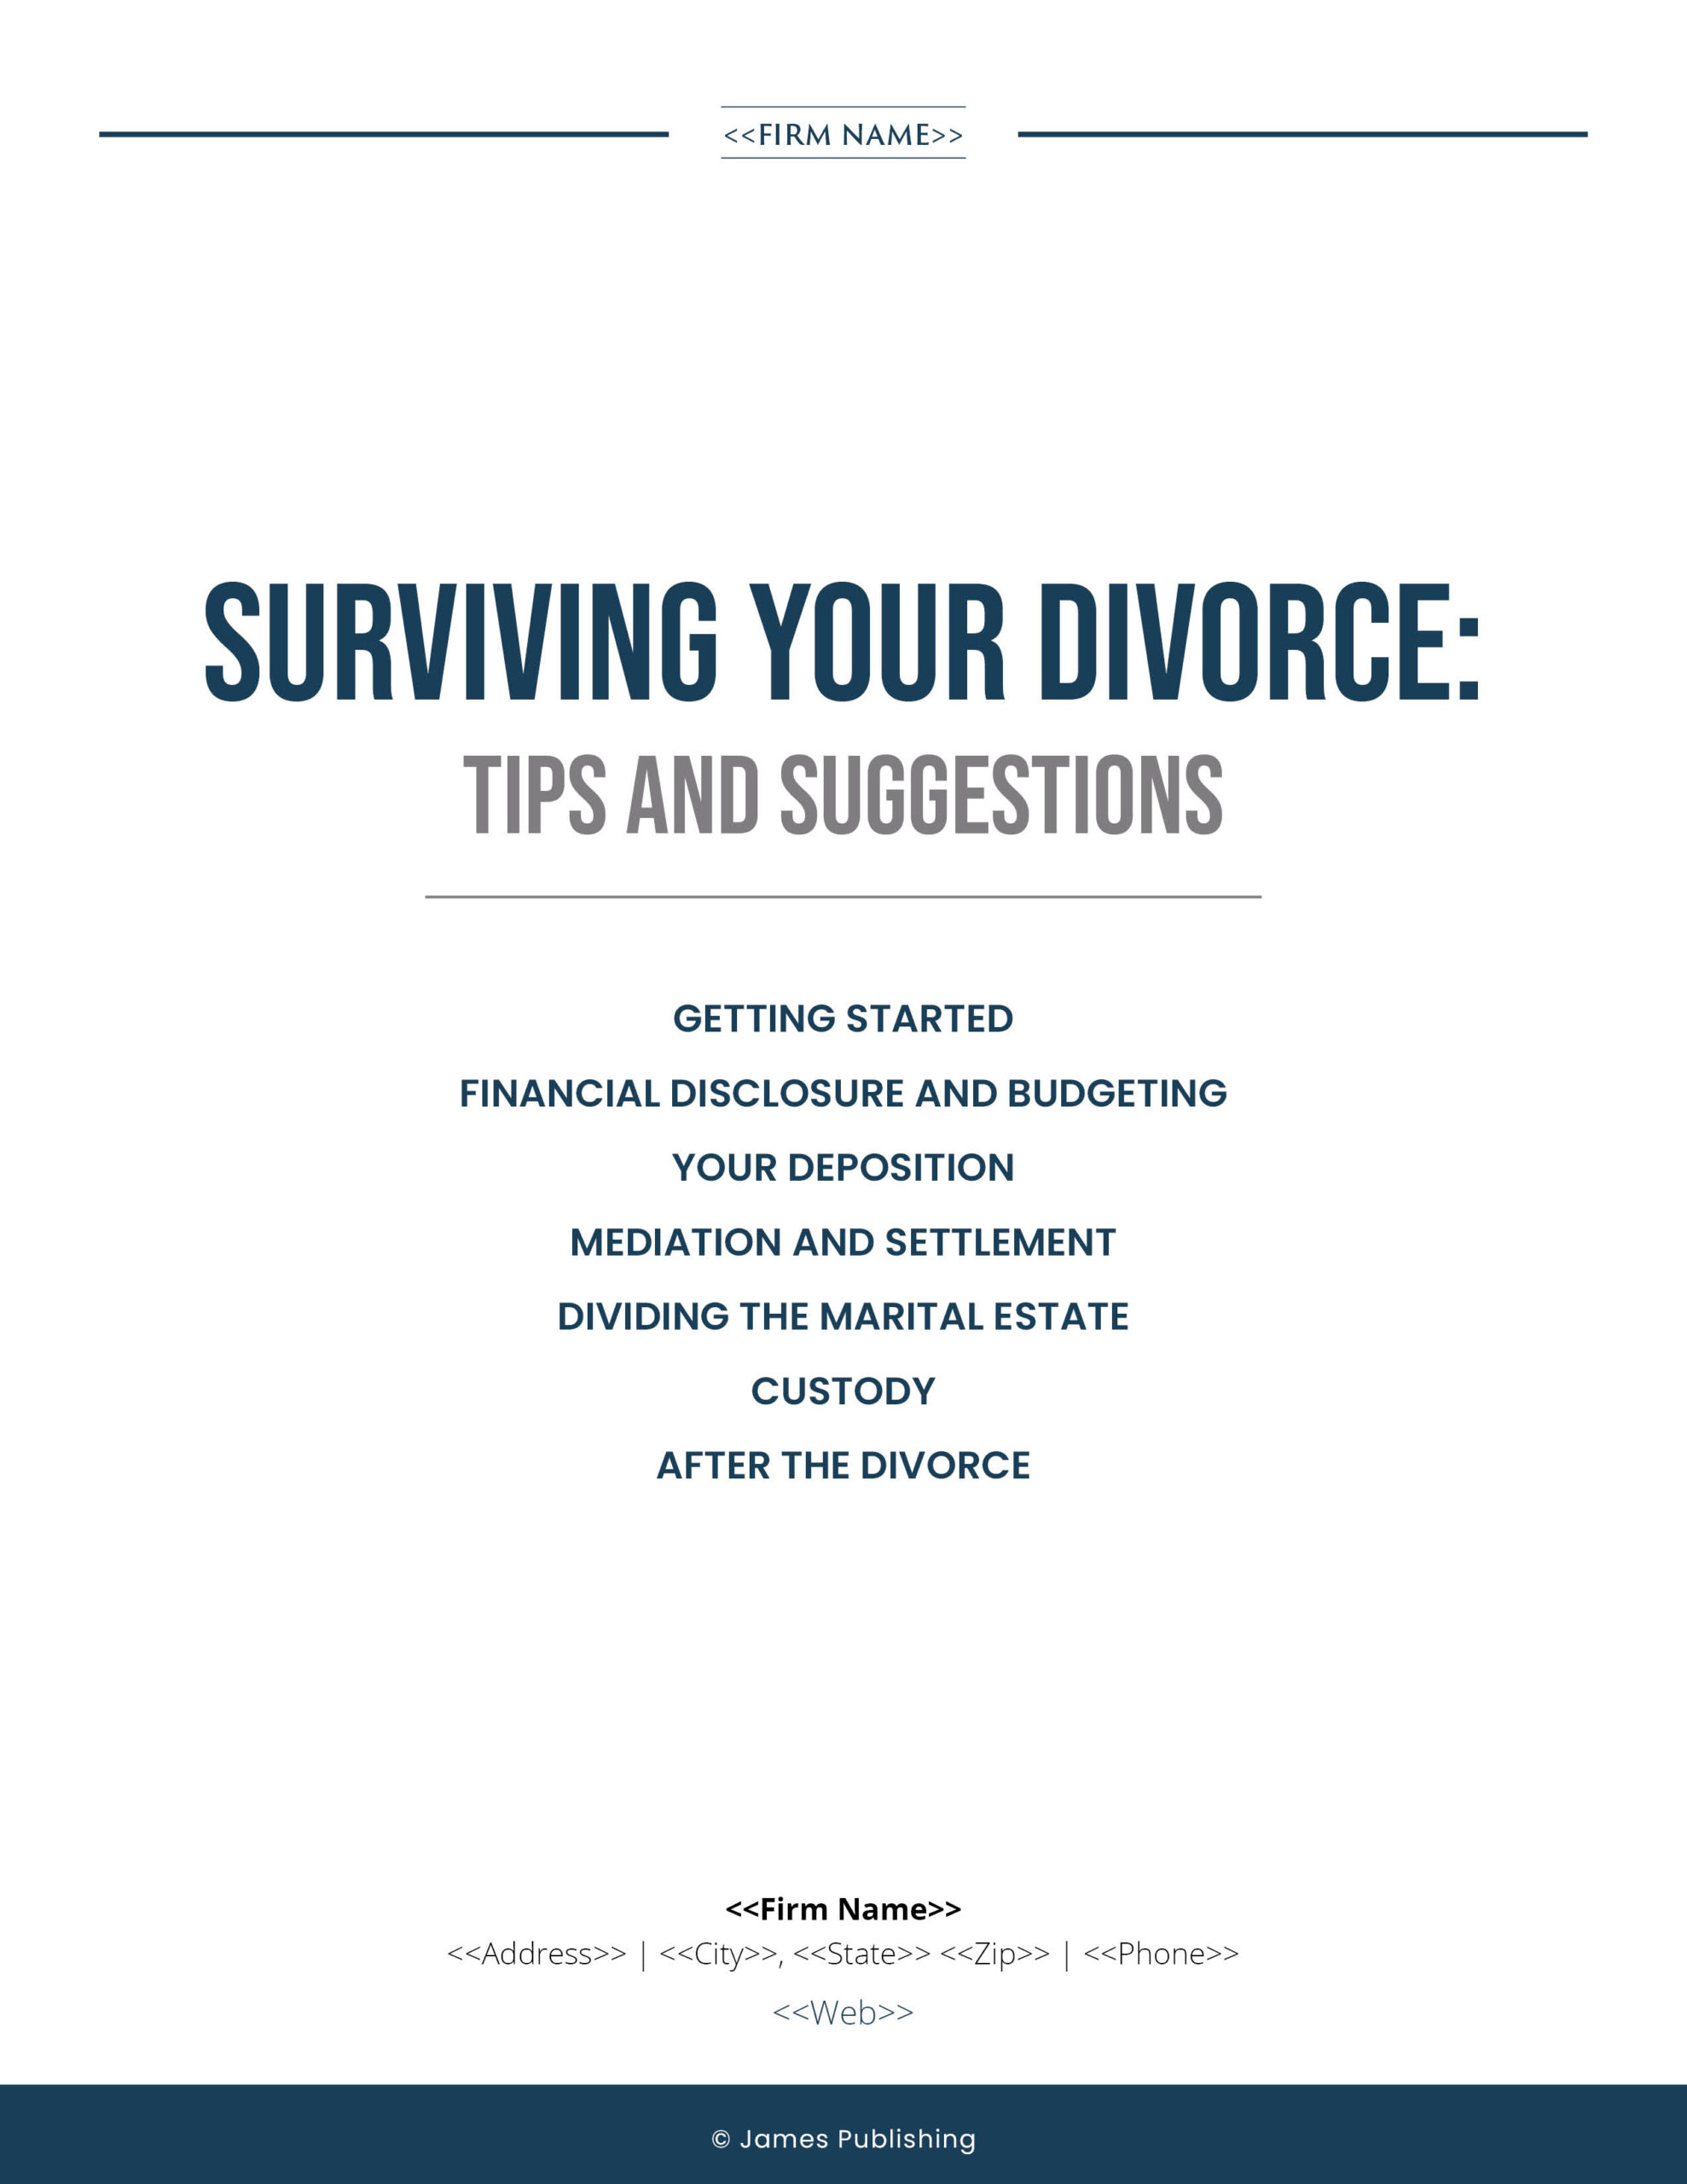 FAM-05 Tips and Suggestions for Surviving Your Divorce